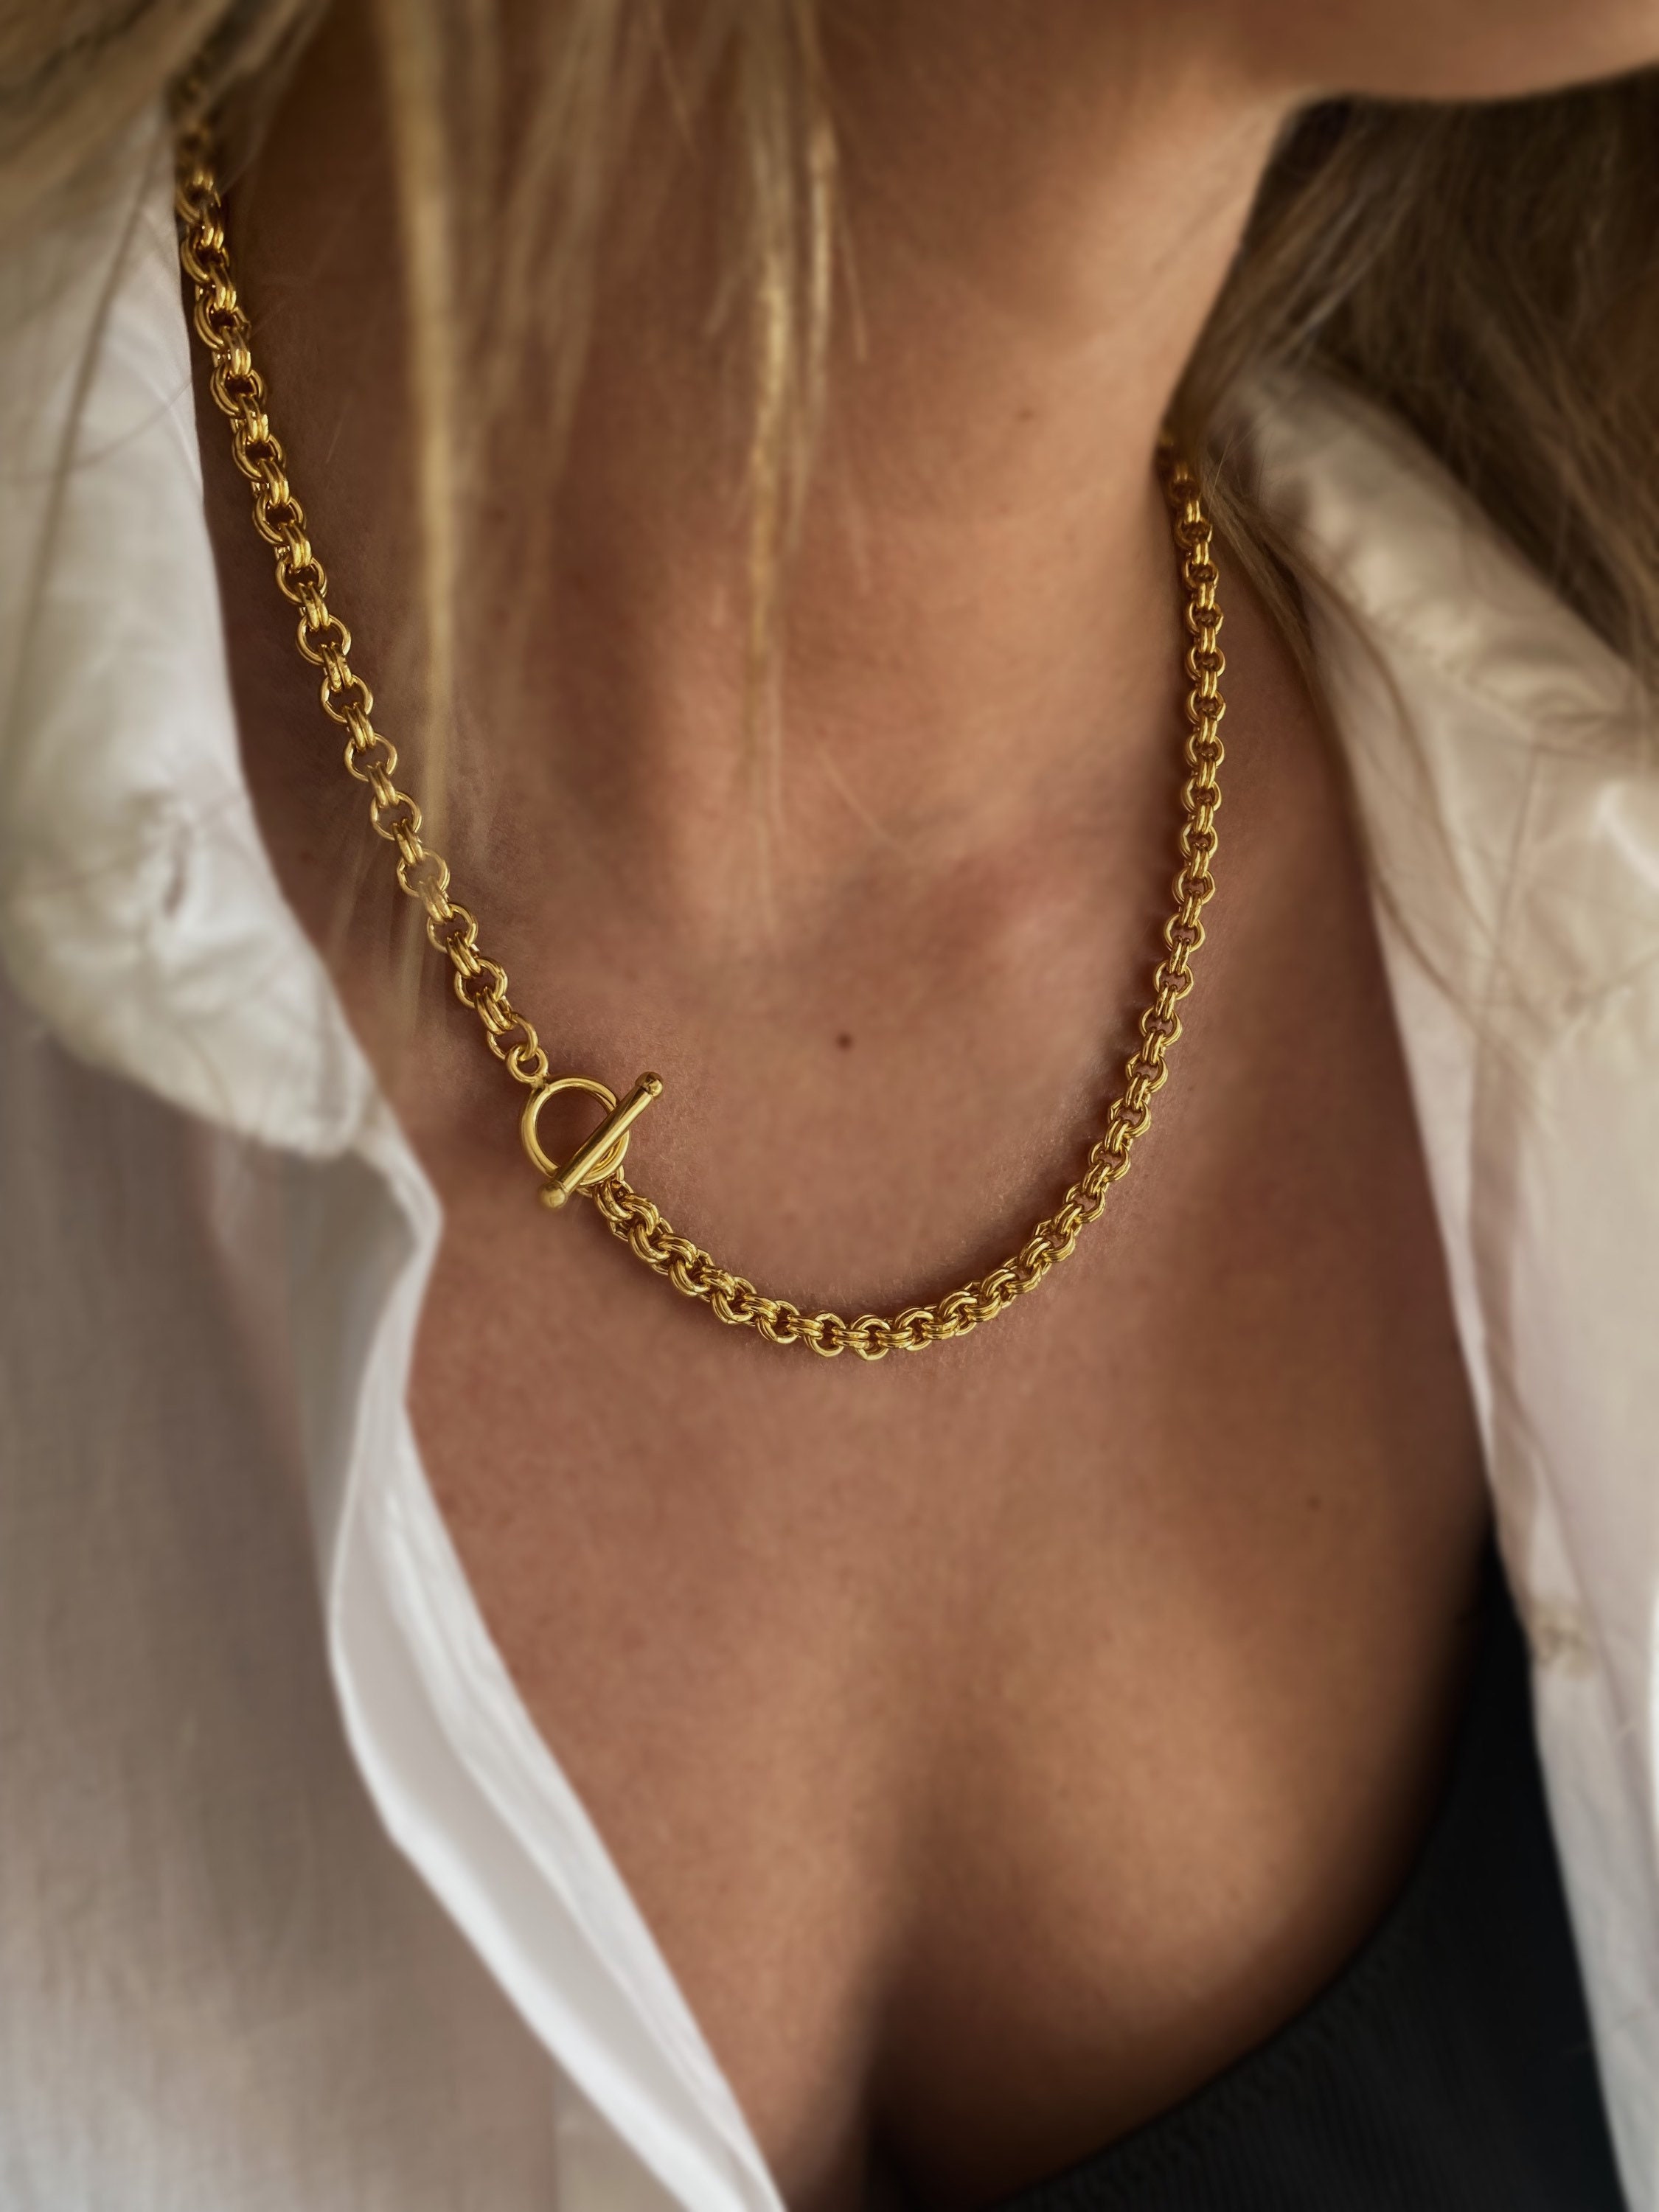 Alison Layered Adjustable T Bar Chain in Gold